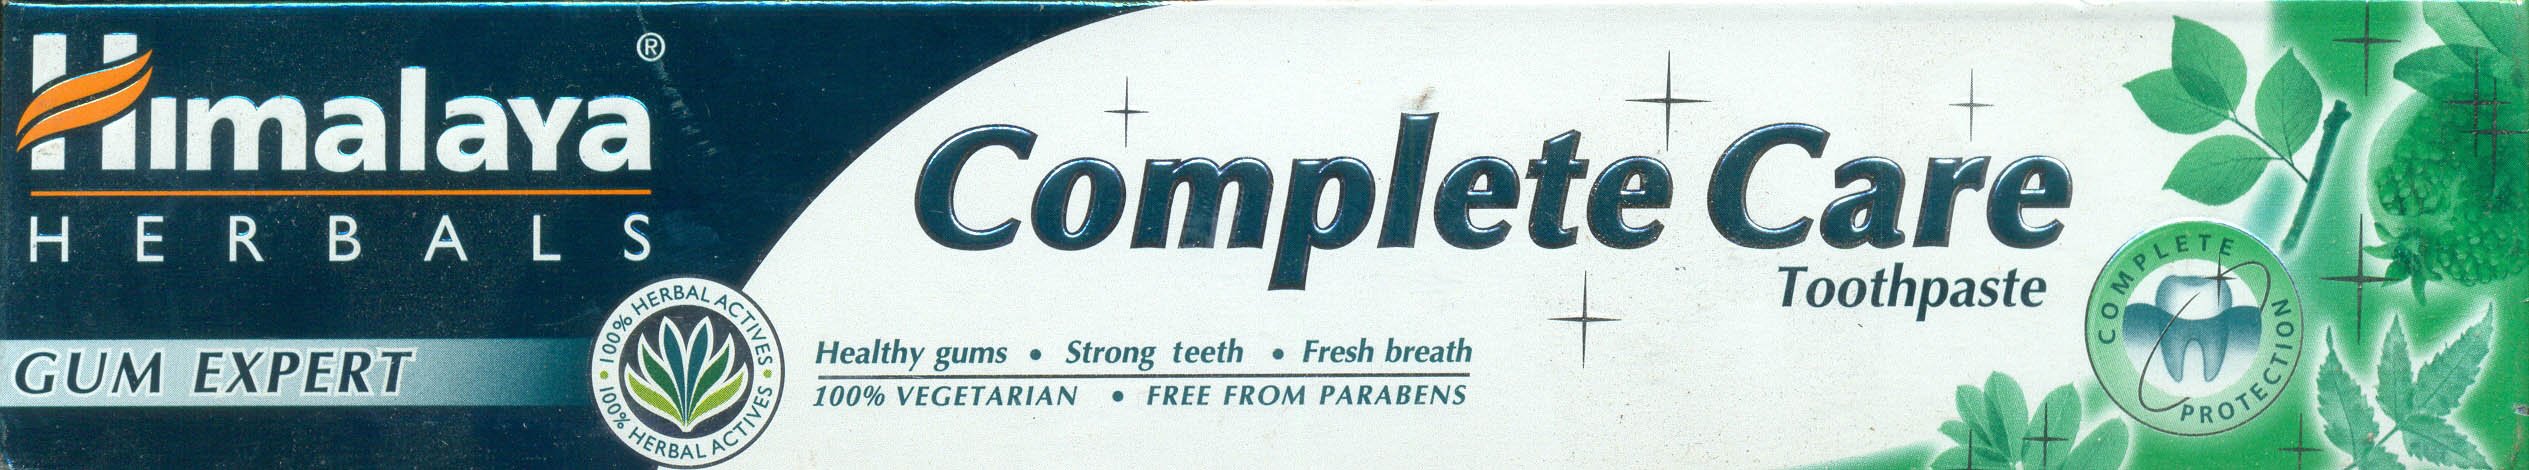 Complete Care Toothpaste (Healthy Gums Strong Teeth and Fresh Breath) - book cover